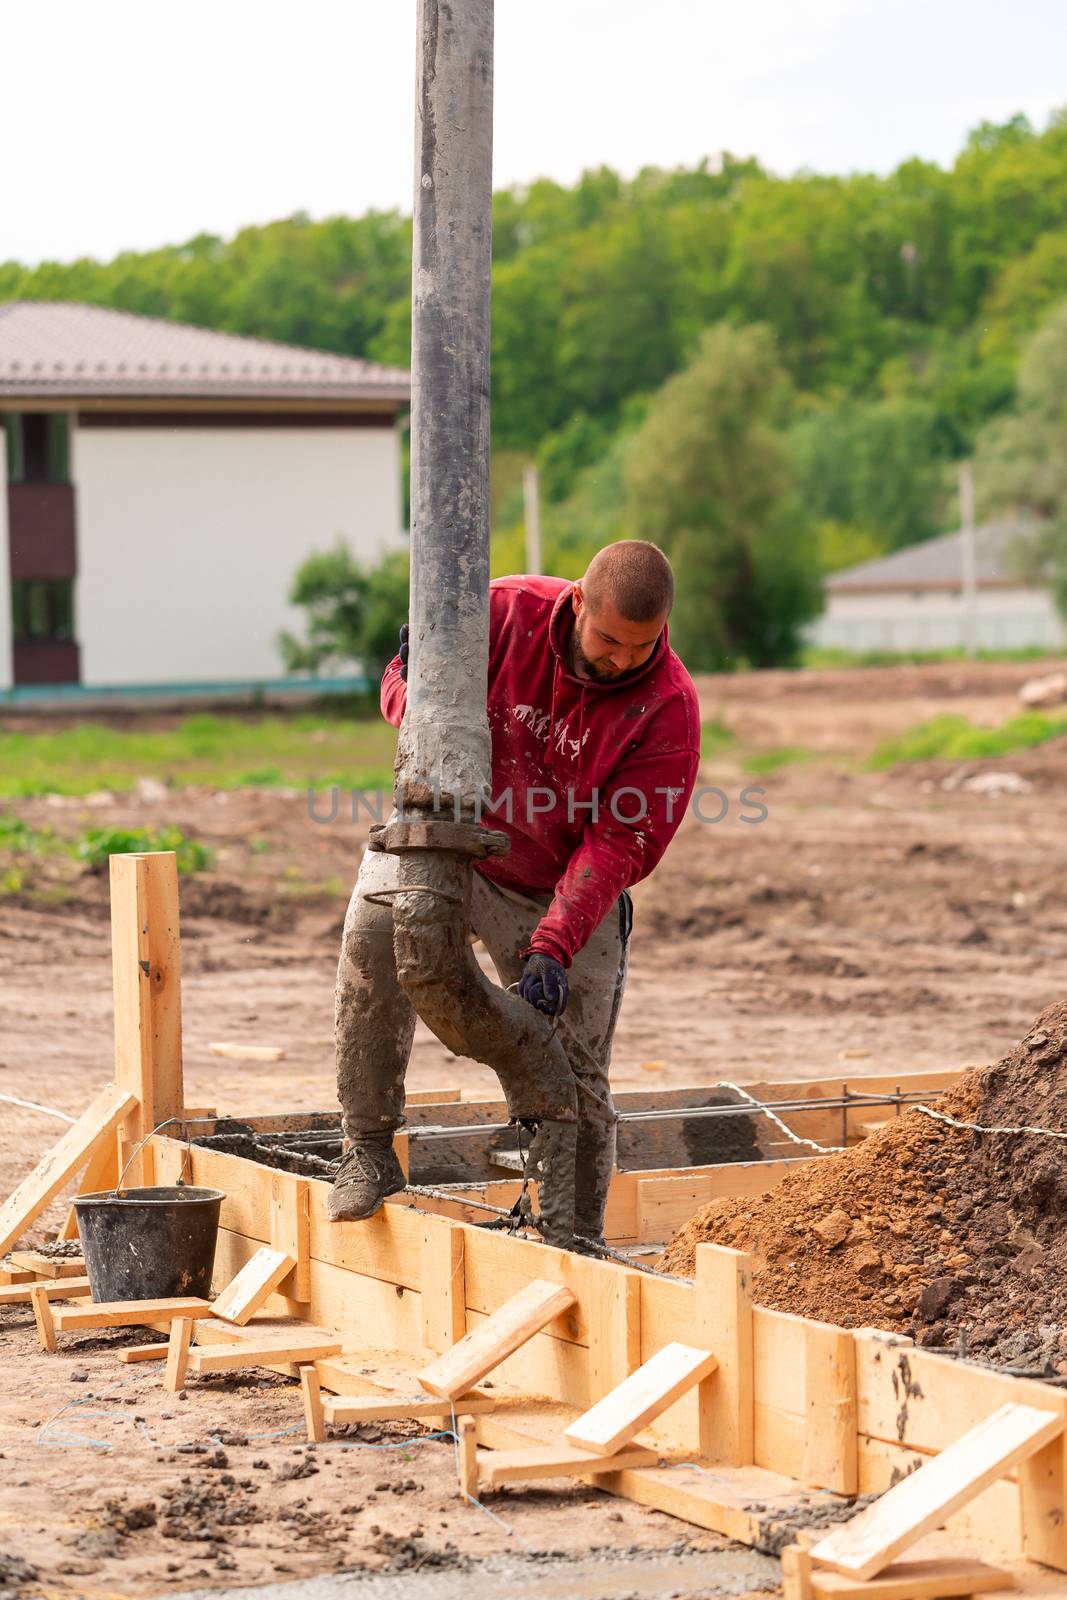 Construction worker laying cement or concrete into the foundation formwork with automatic pump by Len44ik